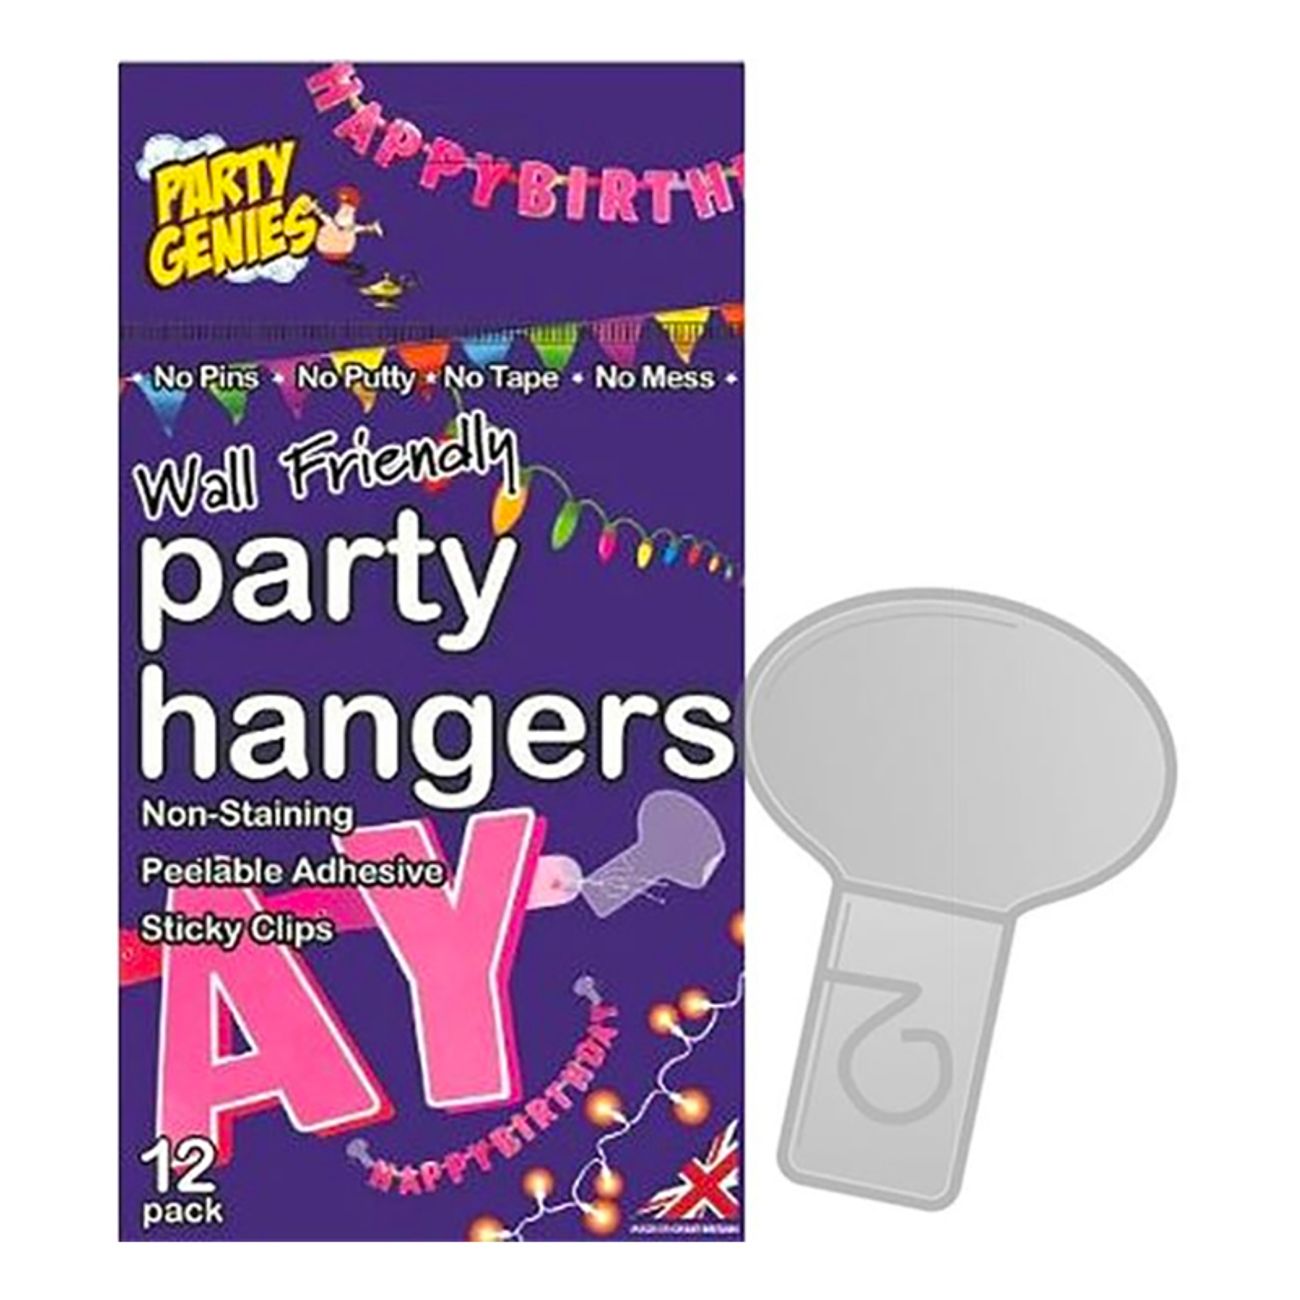 party-genies-party-hangers-1